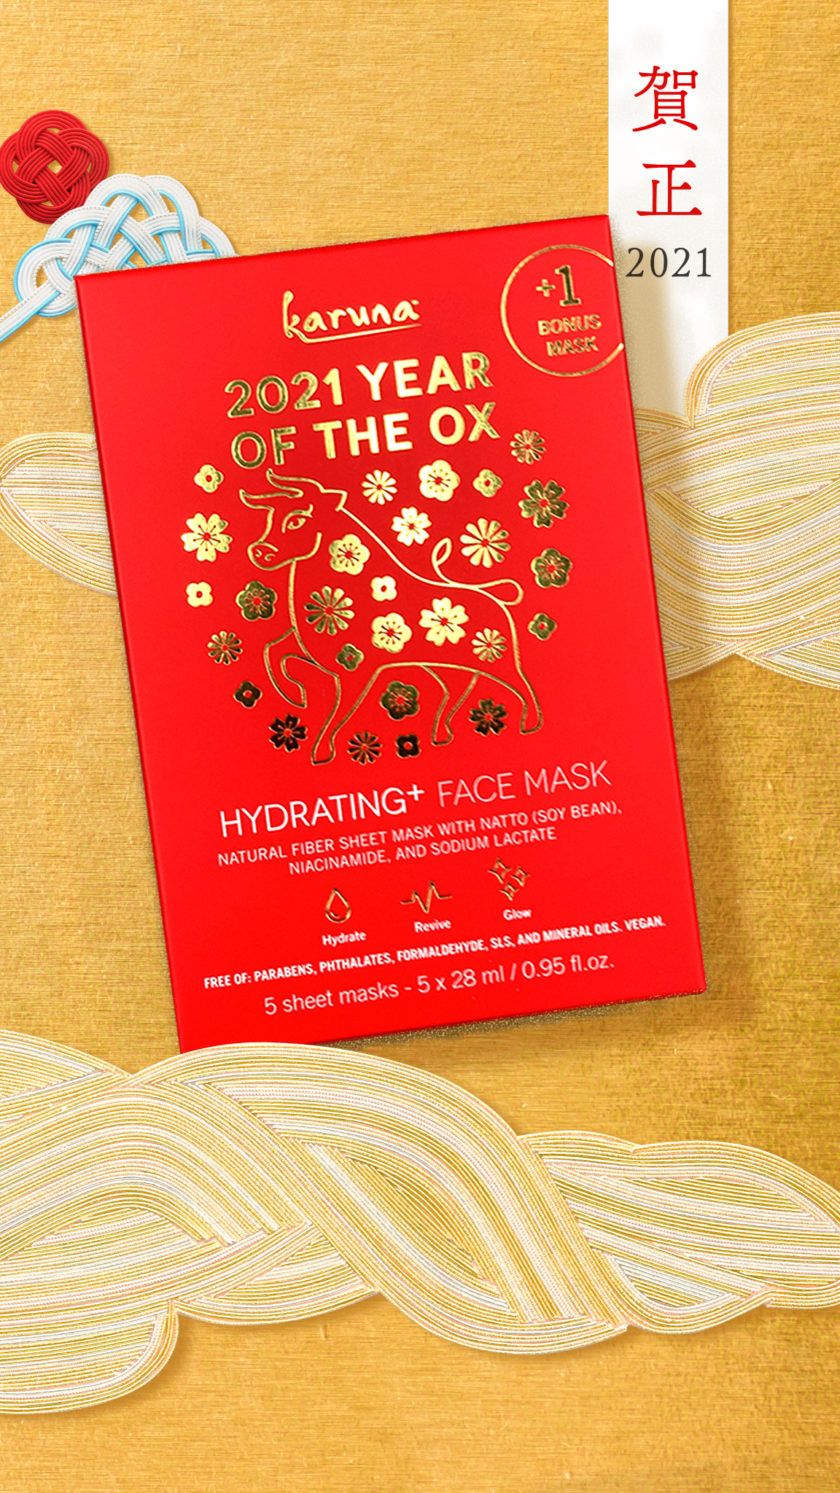 OhMart Karuna 2021 Year of the Ox Hydrating+ Face Mask 2